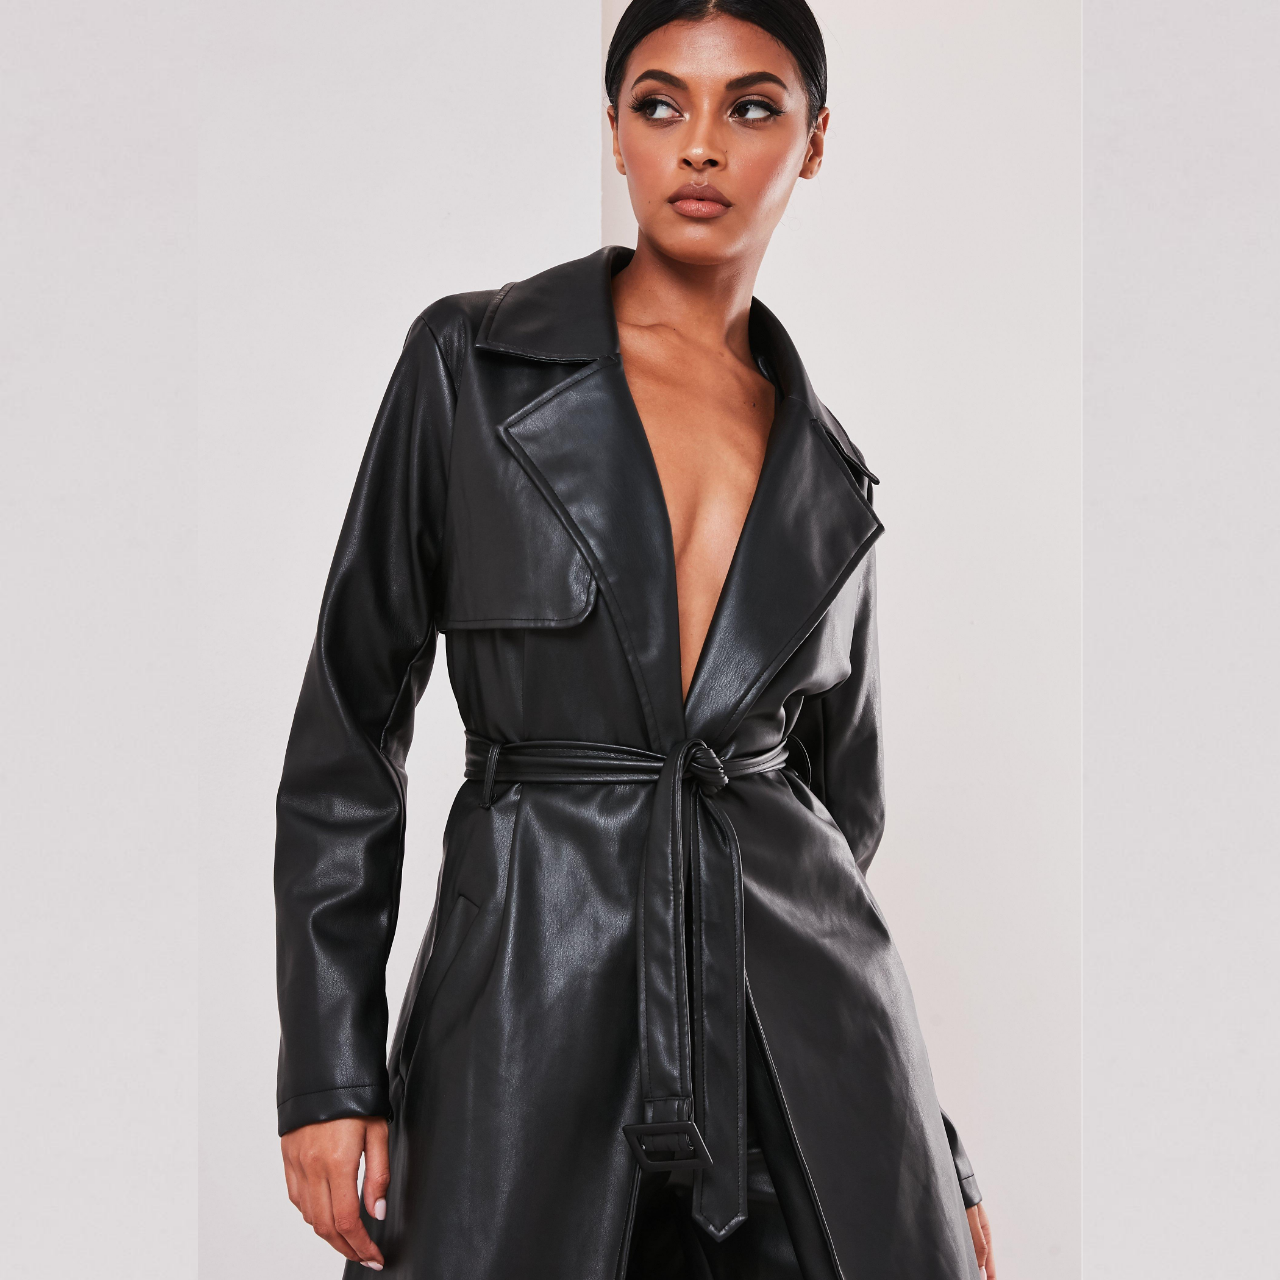 FASHION GUIDE: 5 Gorgeous Trench Coats You Will Never Regret Purchasing